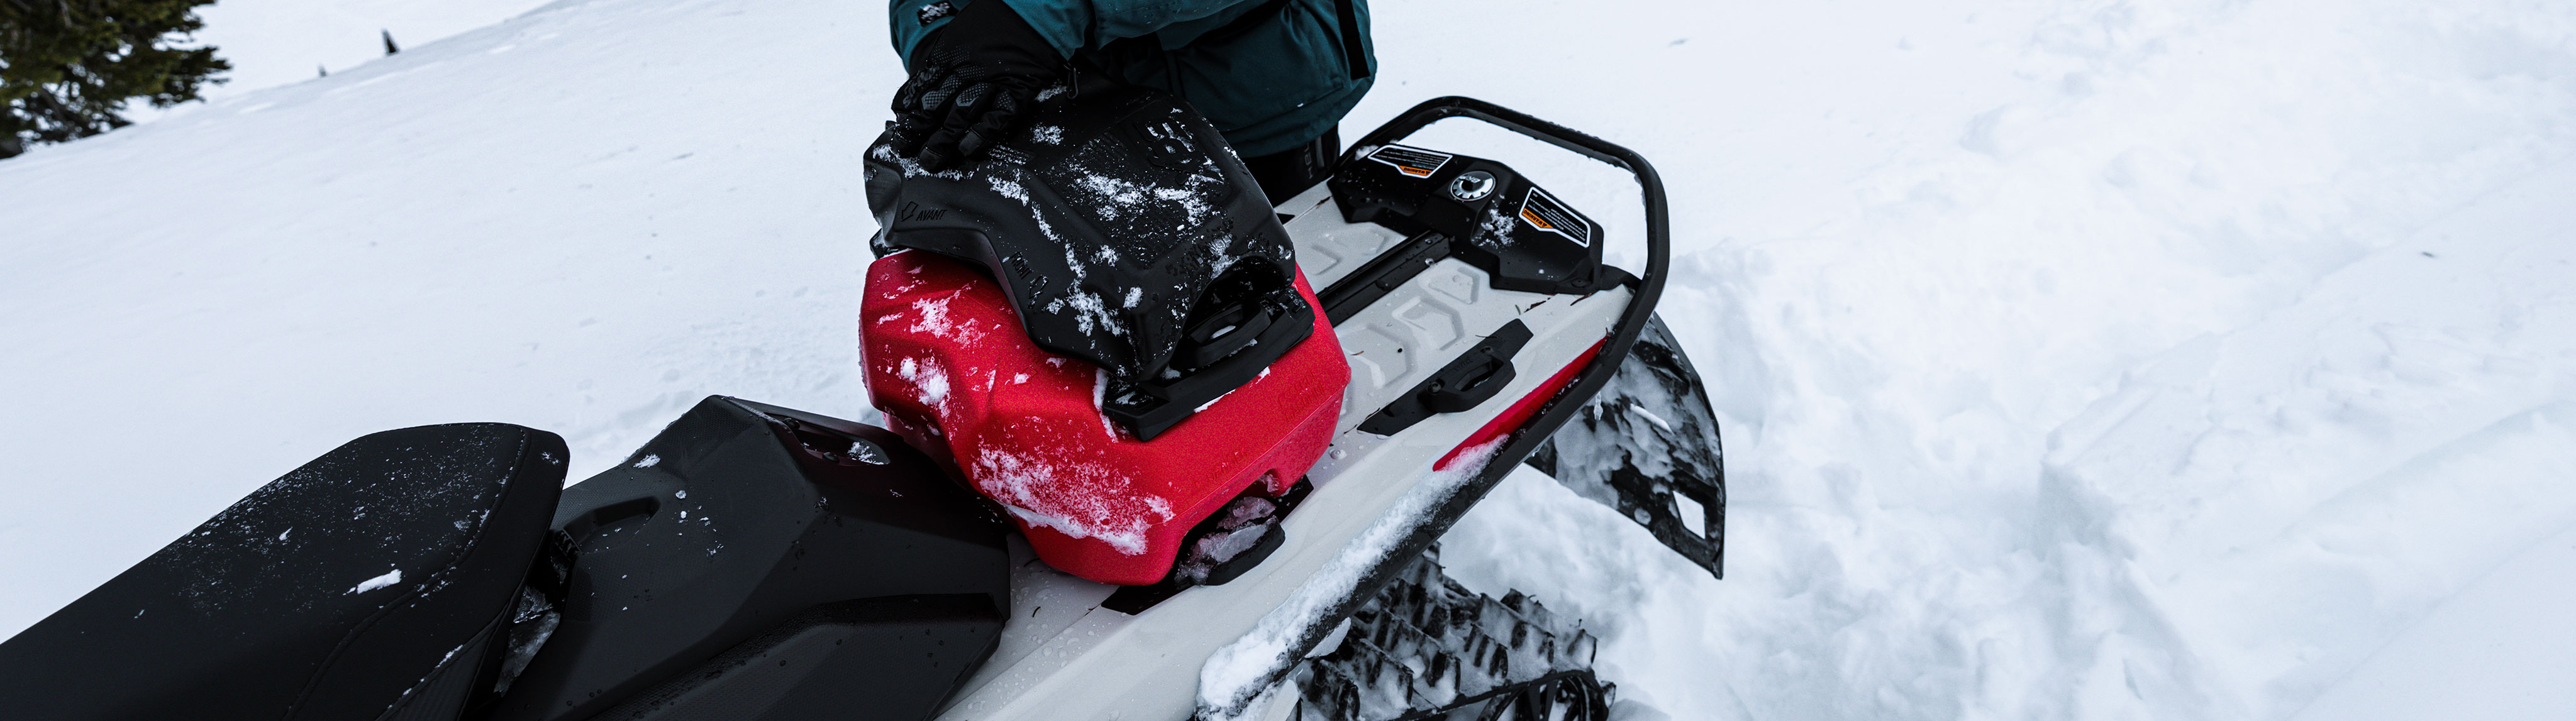 TOP 5 MUST-HAVE SNOWMOBILING ACCESSORIES FOR THE BACKCOUNTRY